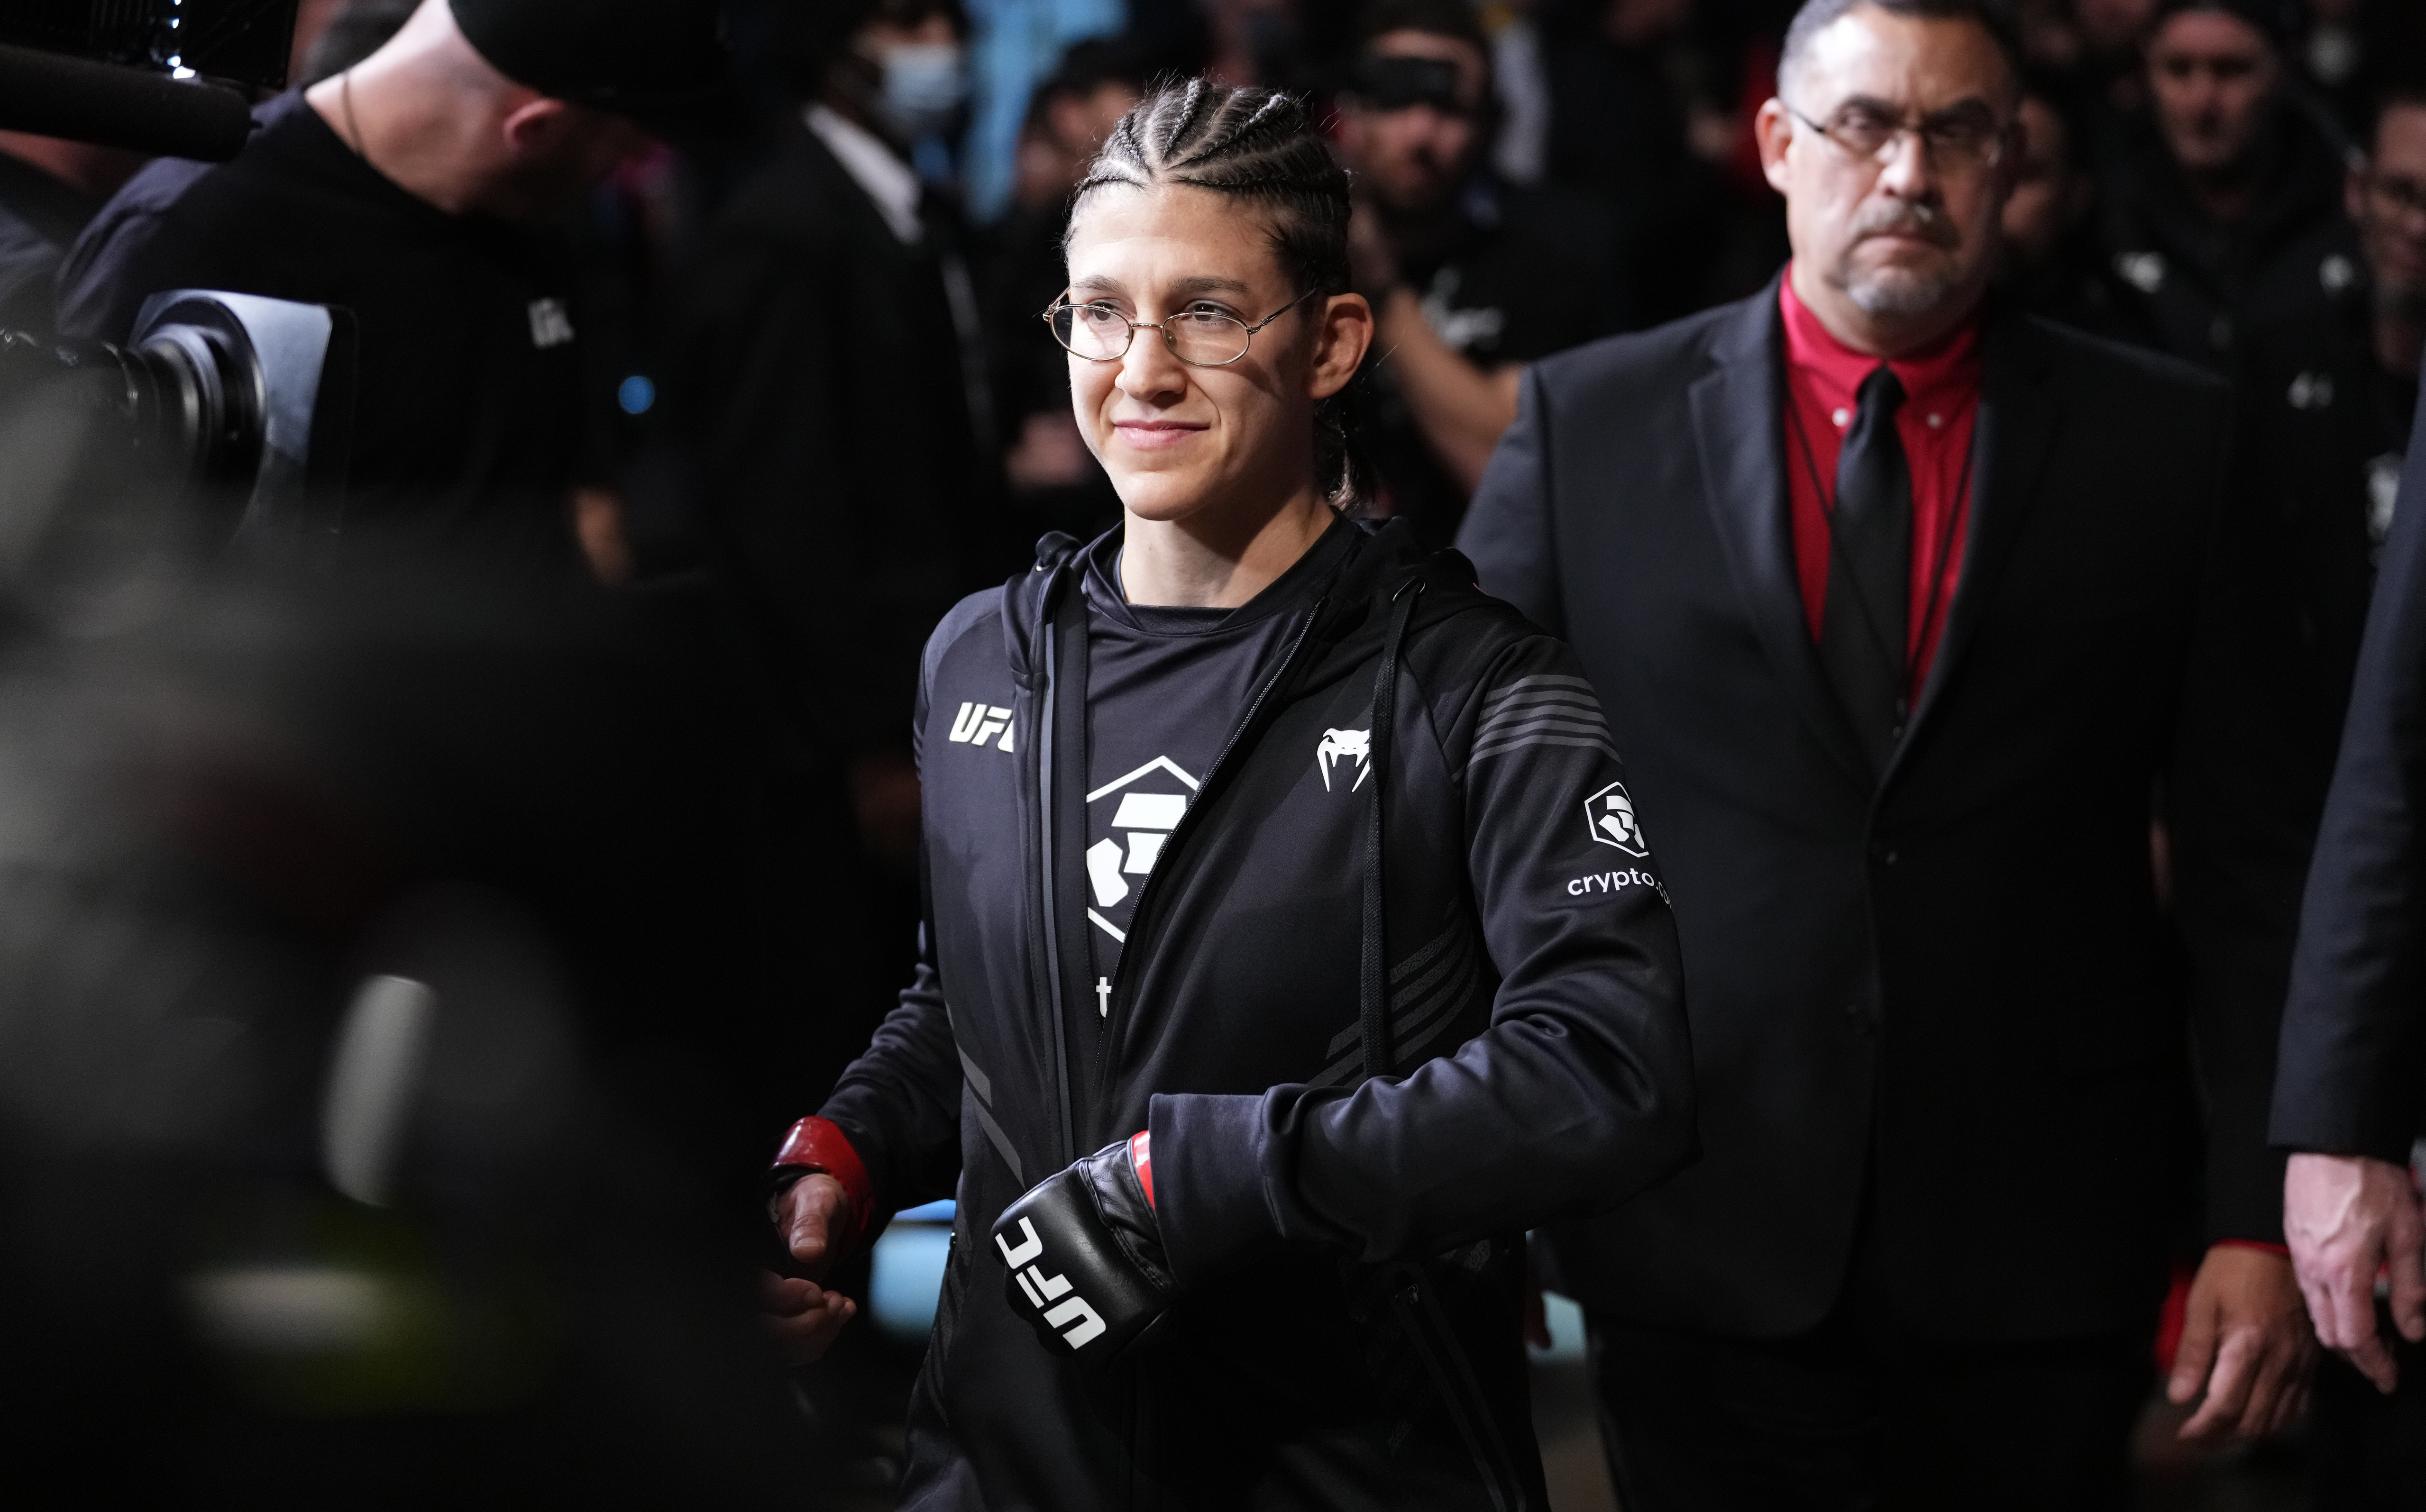 Roxanne Modafferi walks to the cage ahead of her fight with Casey O’Neill at UFC 271.